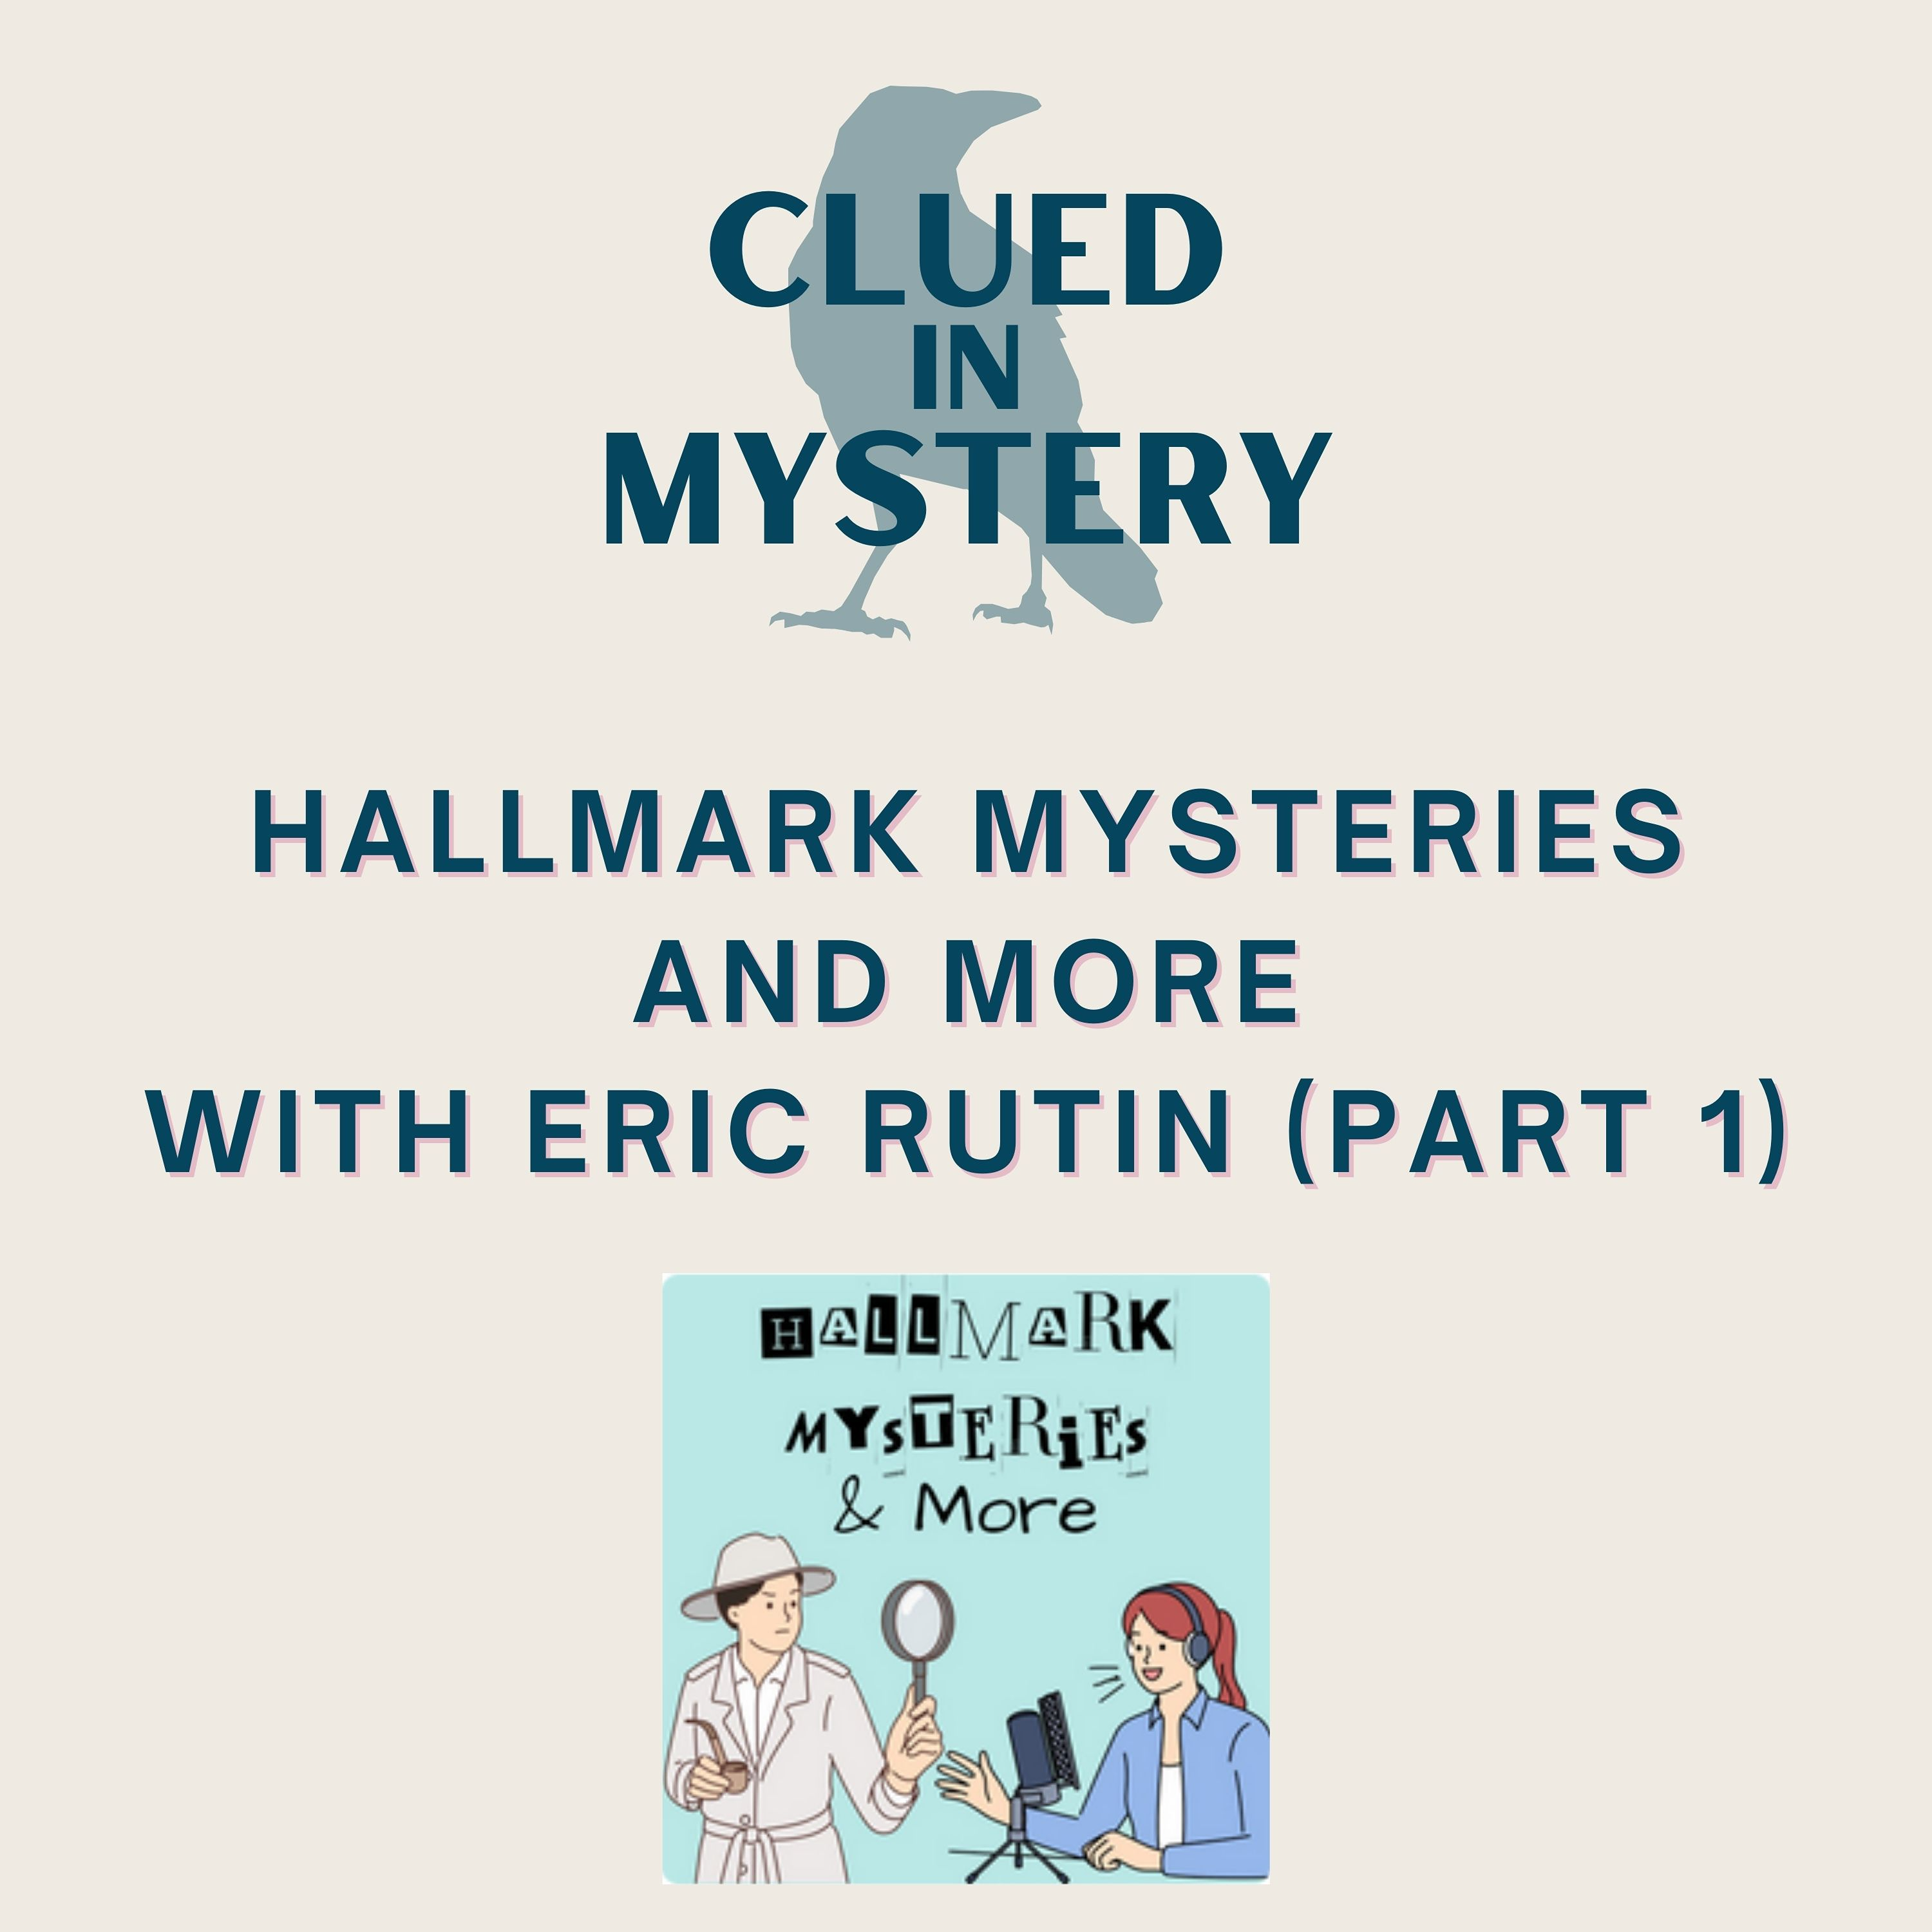 Hallmark Mysteries and More (part 1)